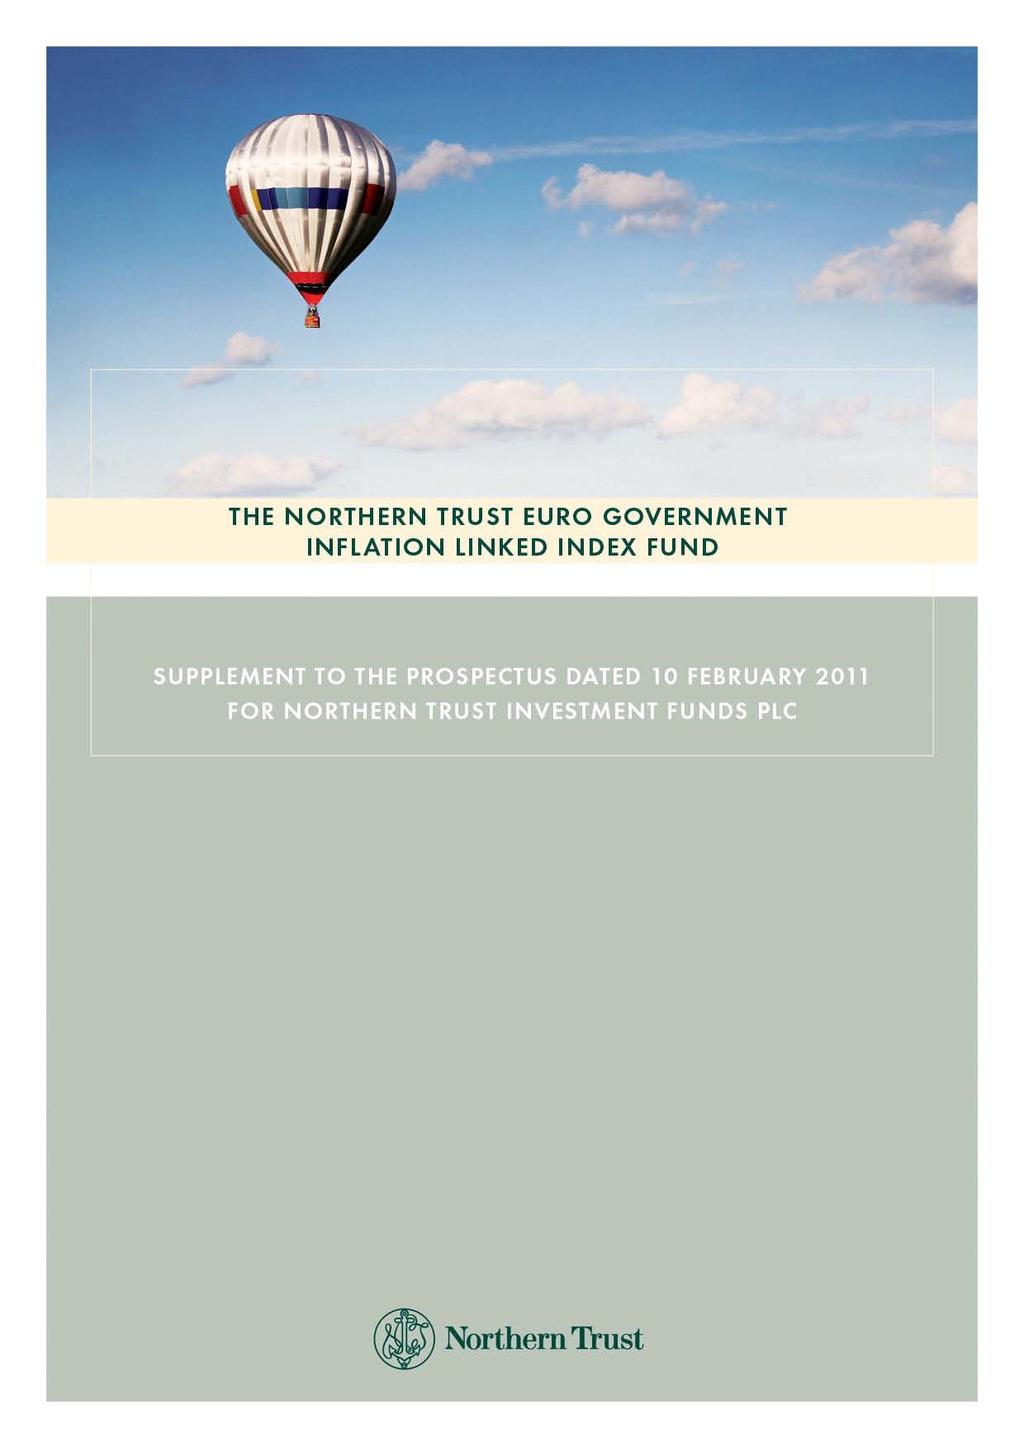 THE NT EURO GOVERNMENT INFLATION LINKED INDEX FUND SUPPLEMENT TO THE